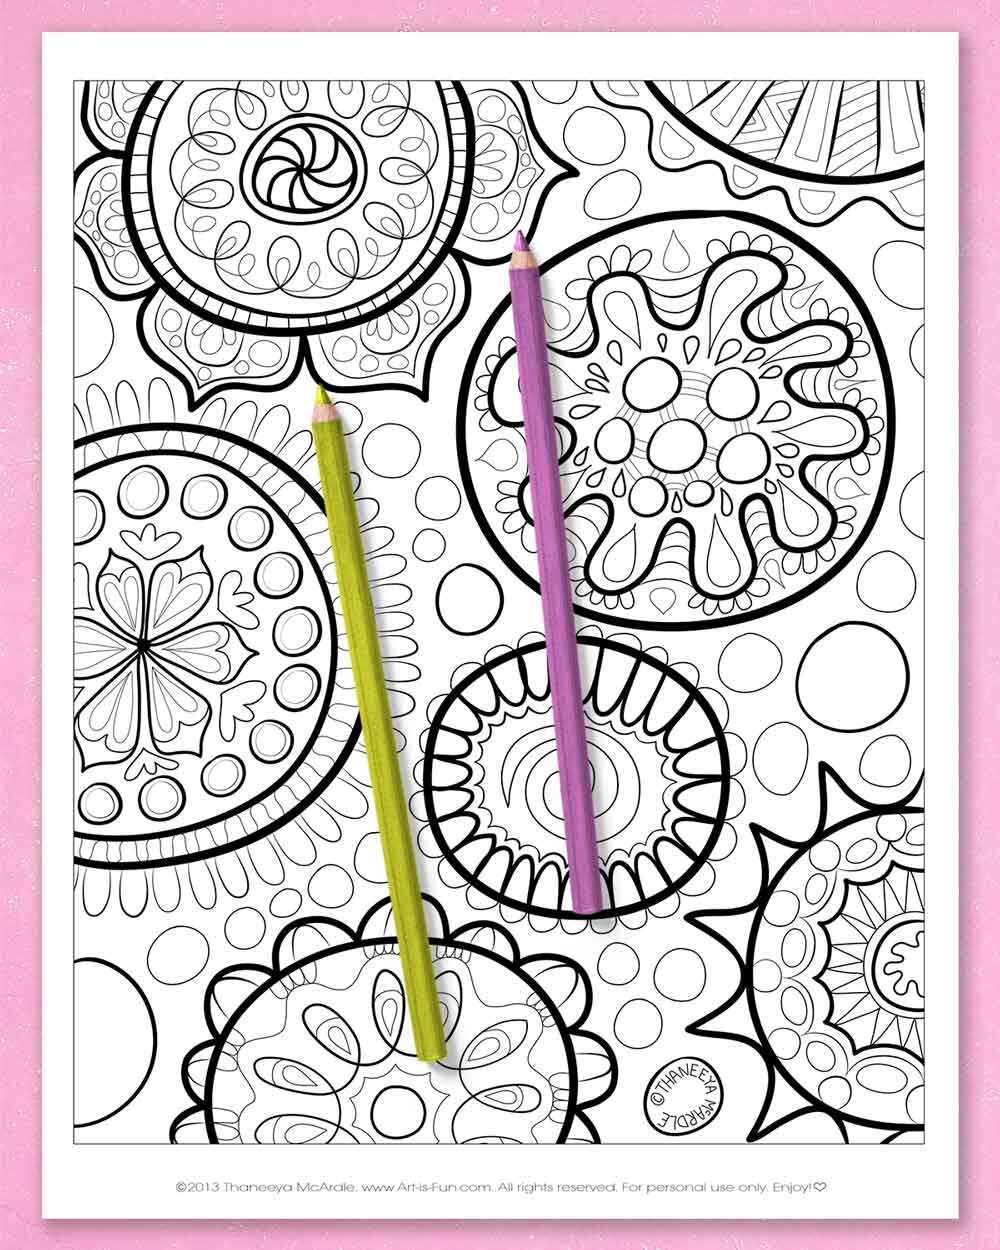 Abstract Coloring Pages - Printable E-Book of Groovy Abstract Designs